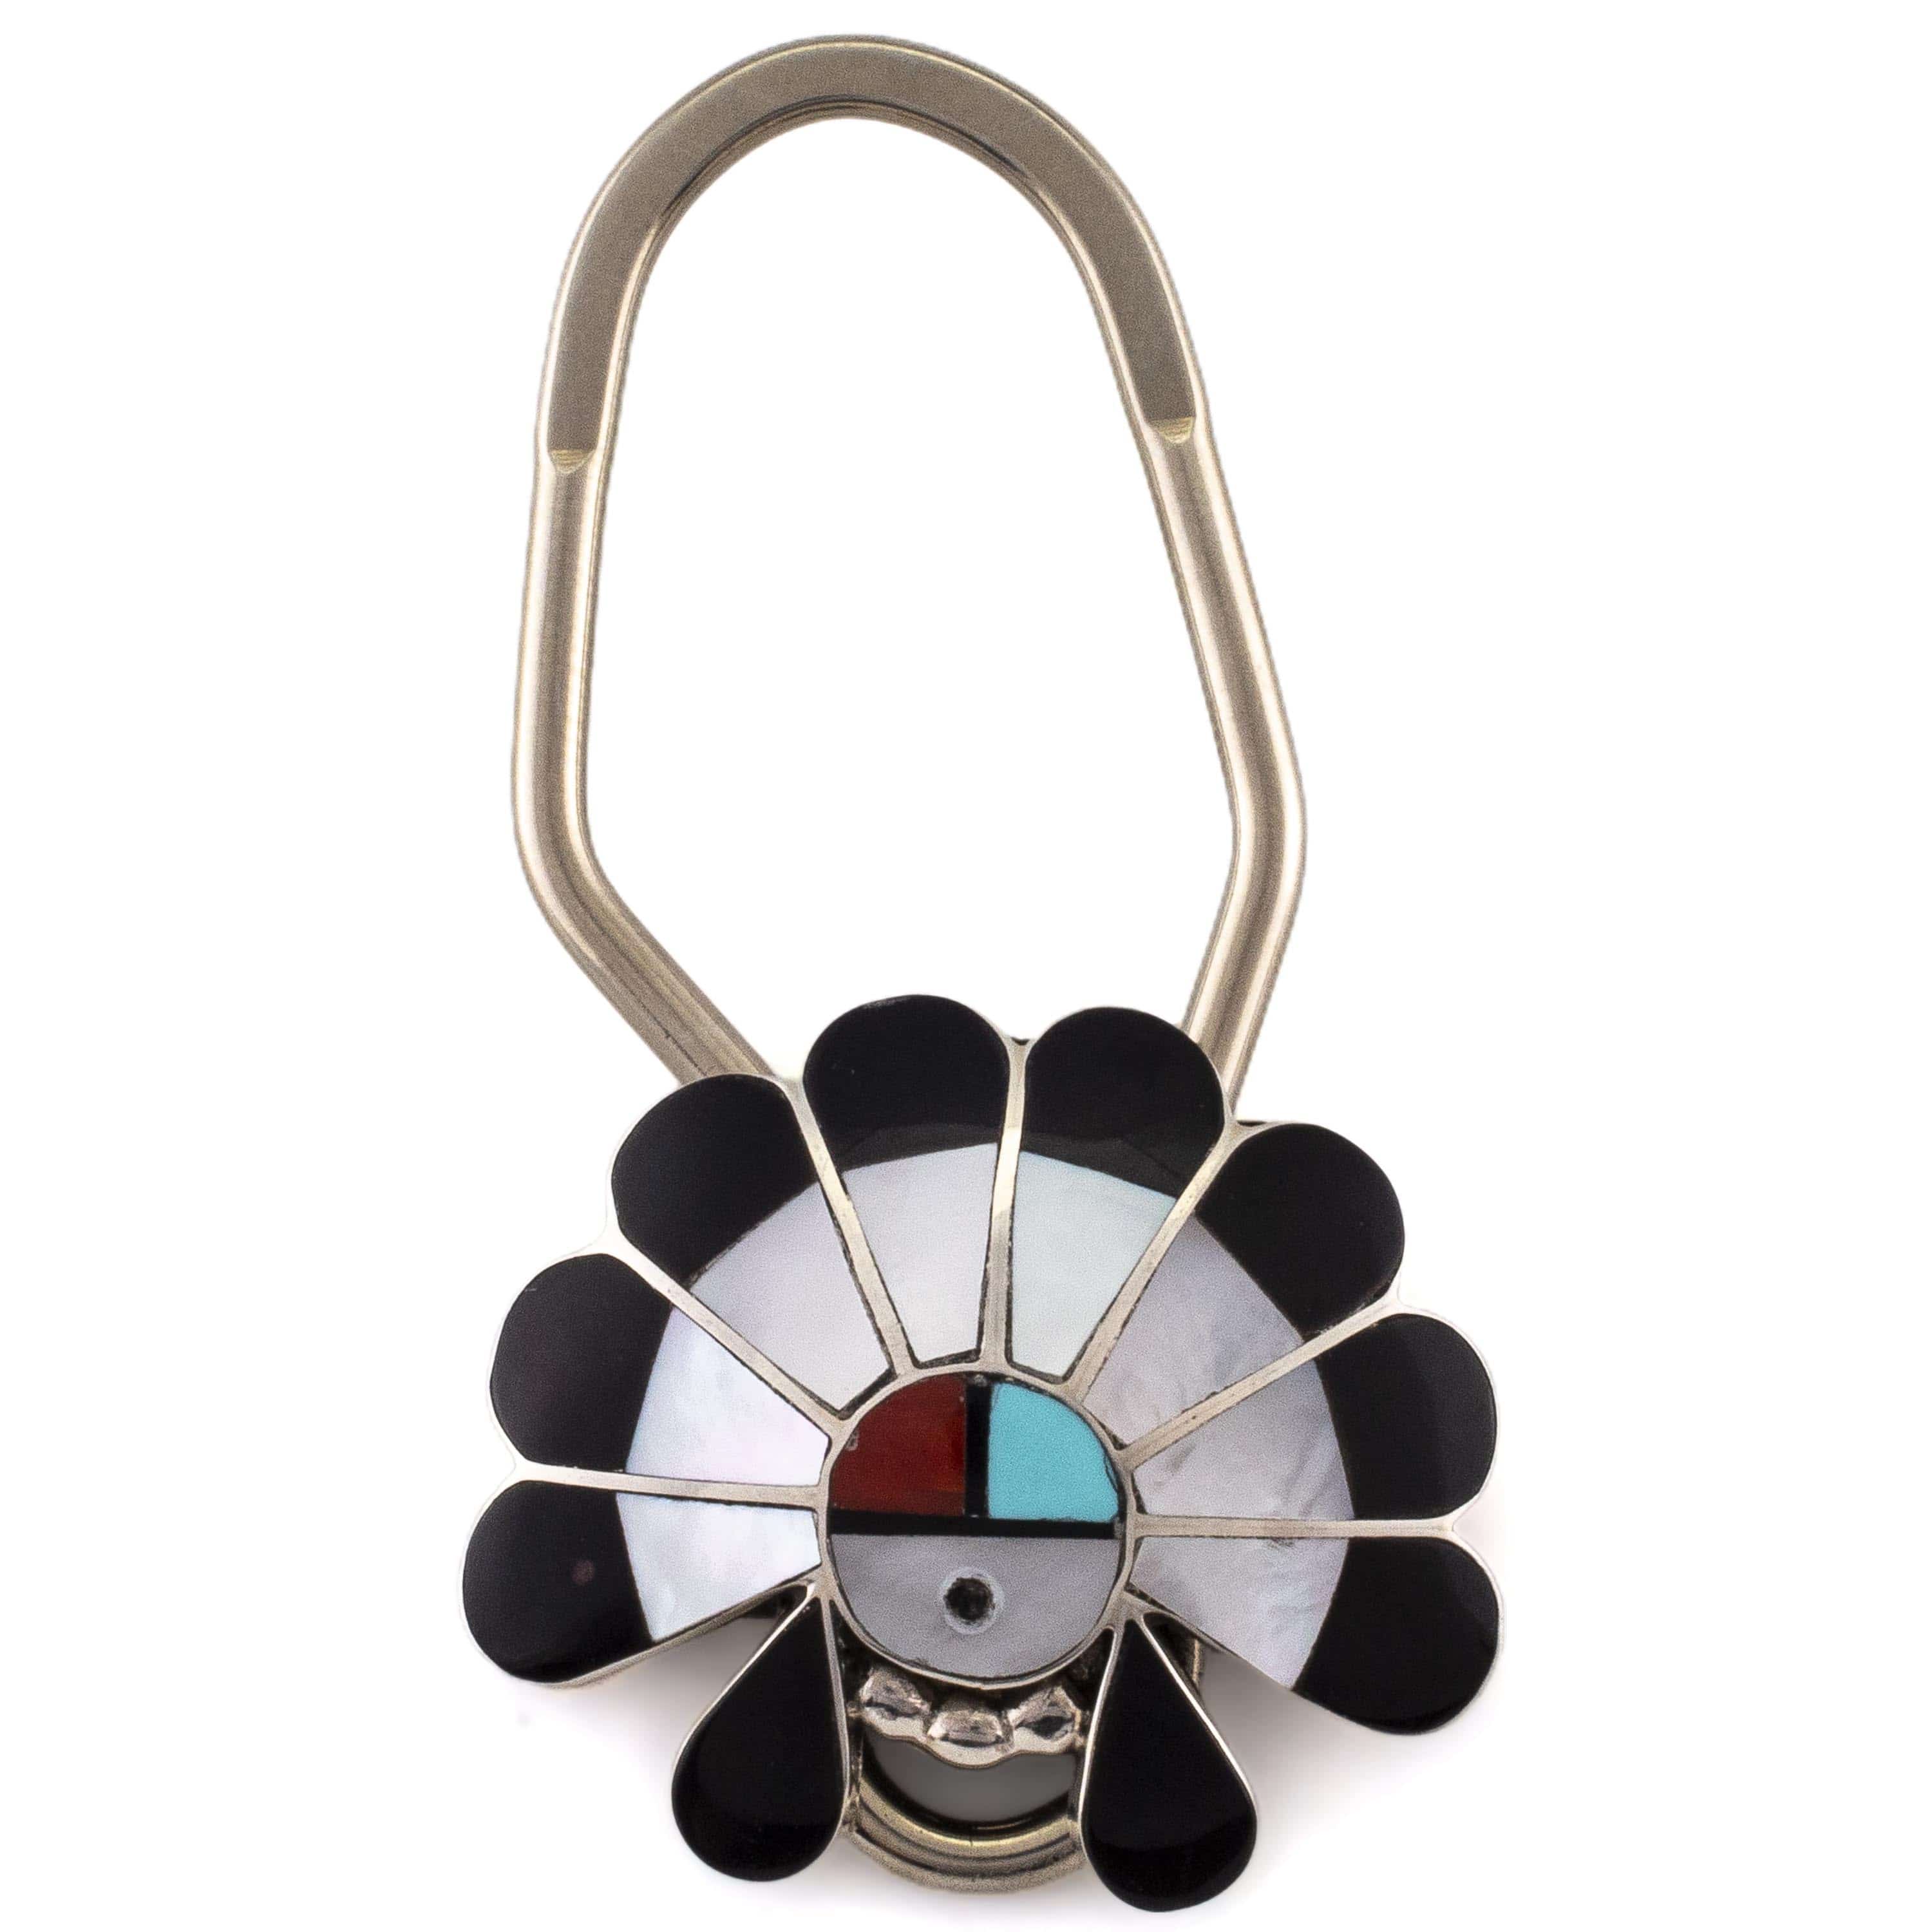 Kalifano Native American Jewelry Denise Siutza Zuni Sunface Mother of Pearl and Black Onyx with Coral and Turquoise Accents USA Native American Made 925 Sterling Silver Keychain NAK200.002